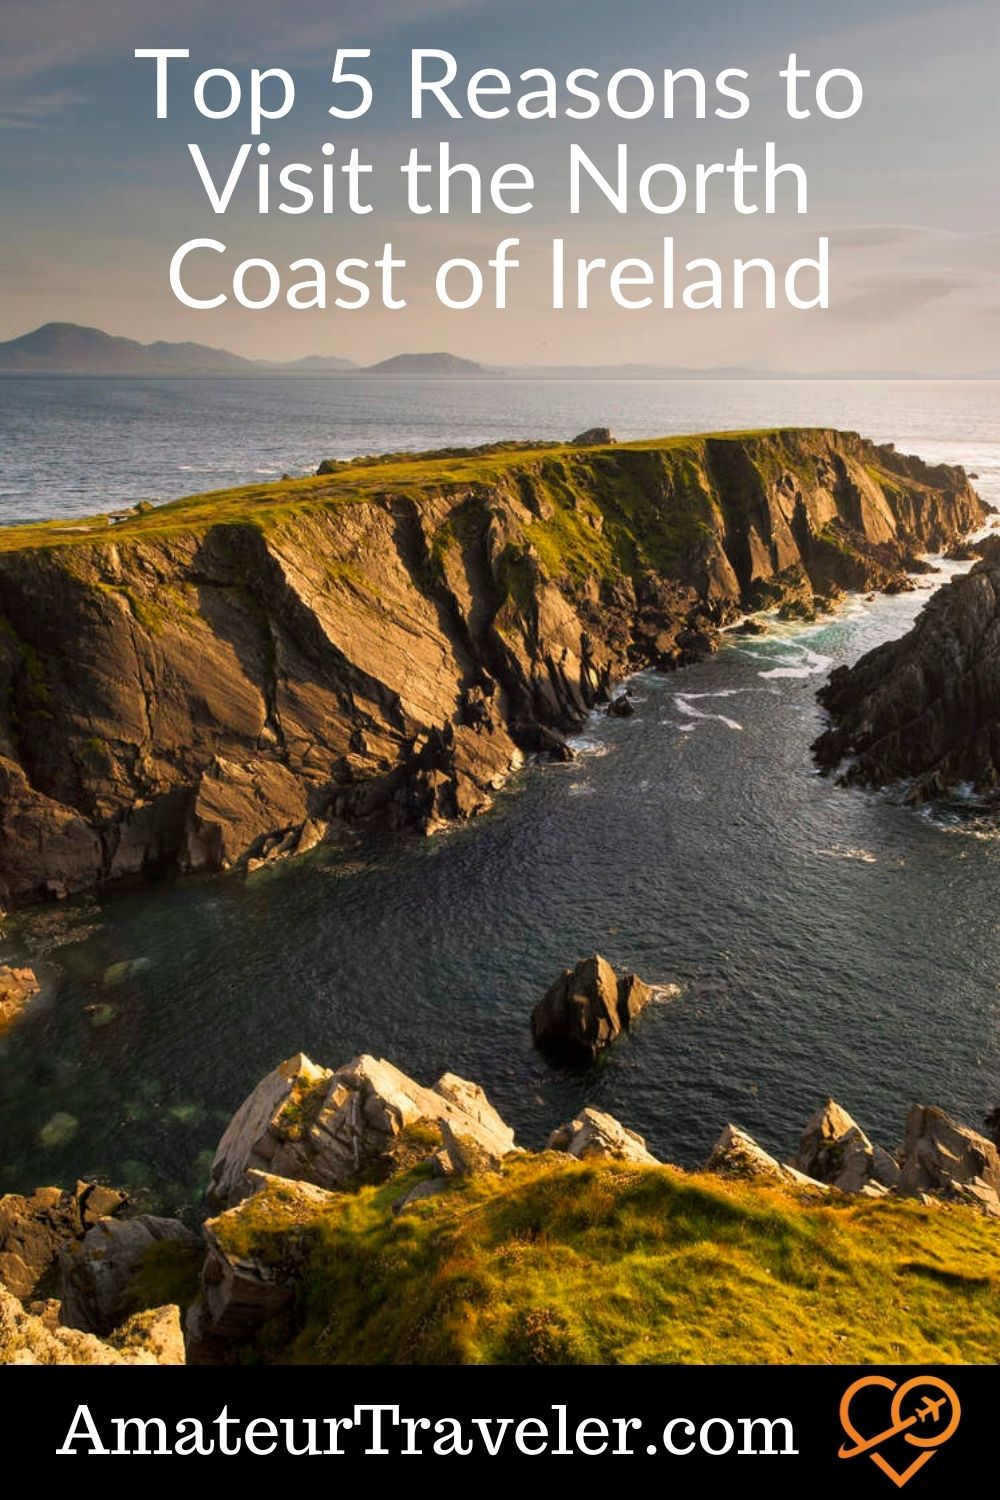 Top 5 Reasons to Visit the North Coast of Ireland #travel #trip #vacation #ireland #northern-island #game-of-thrones #coast